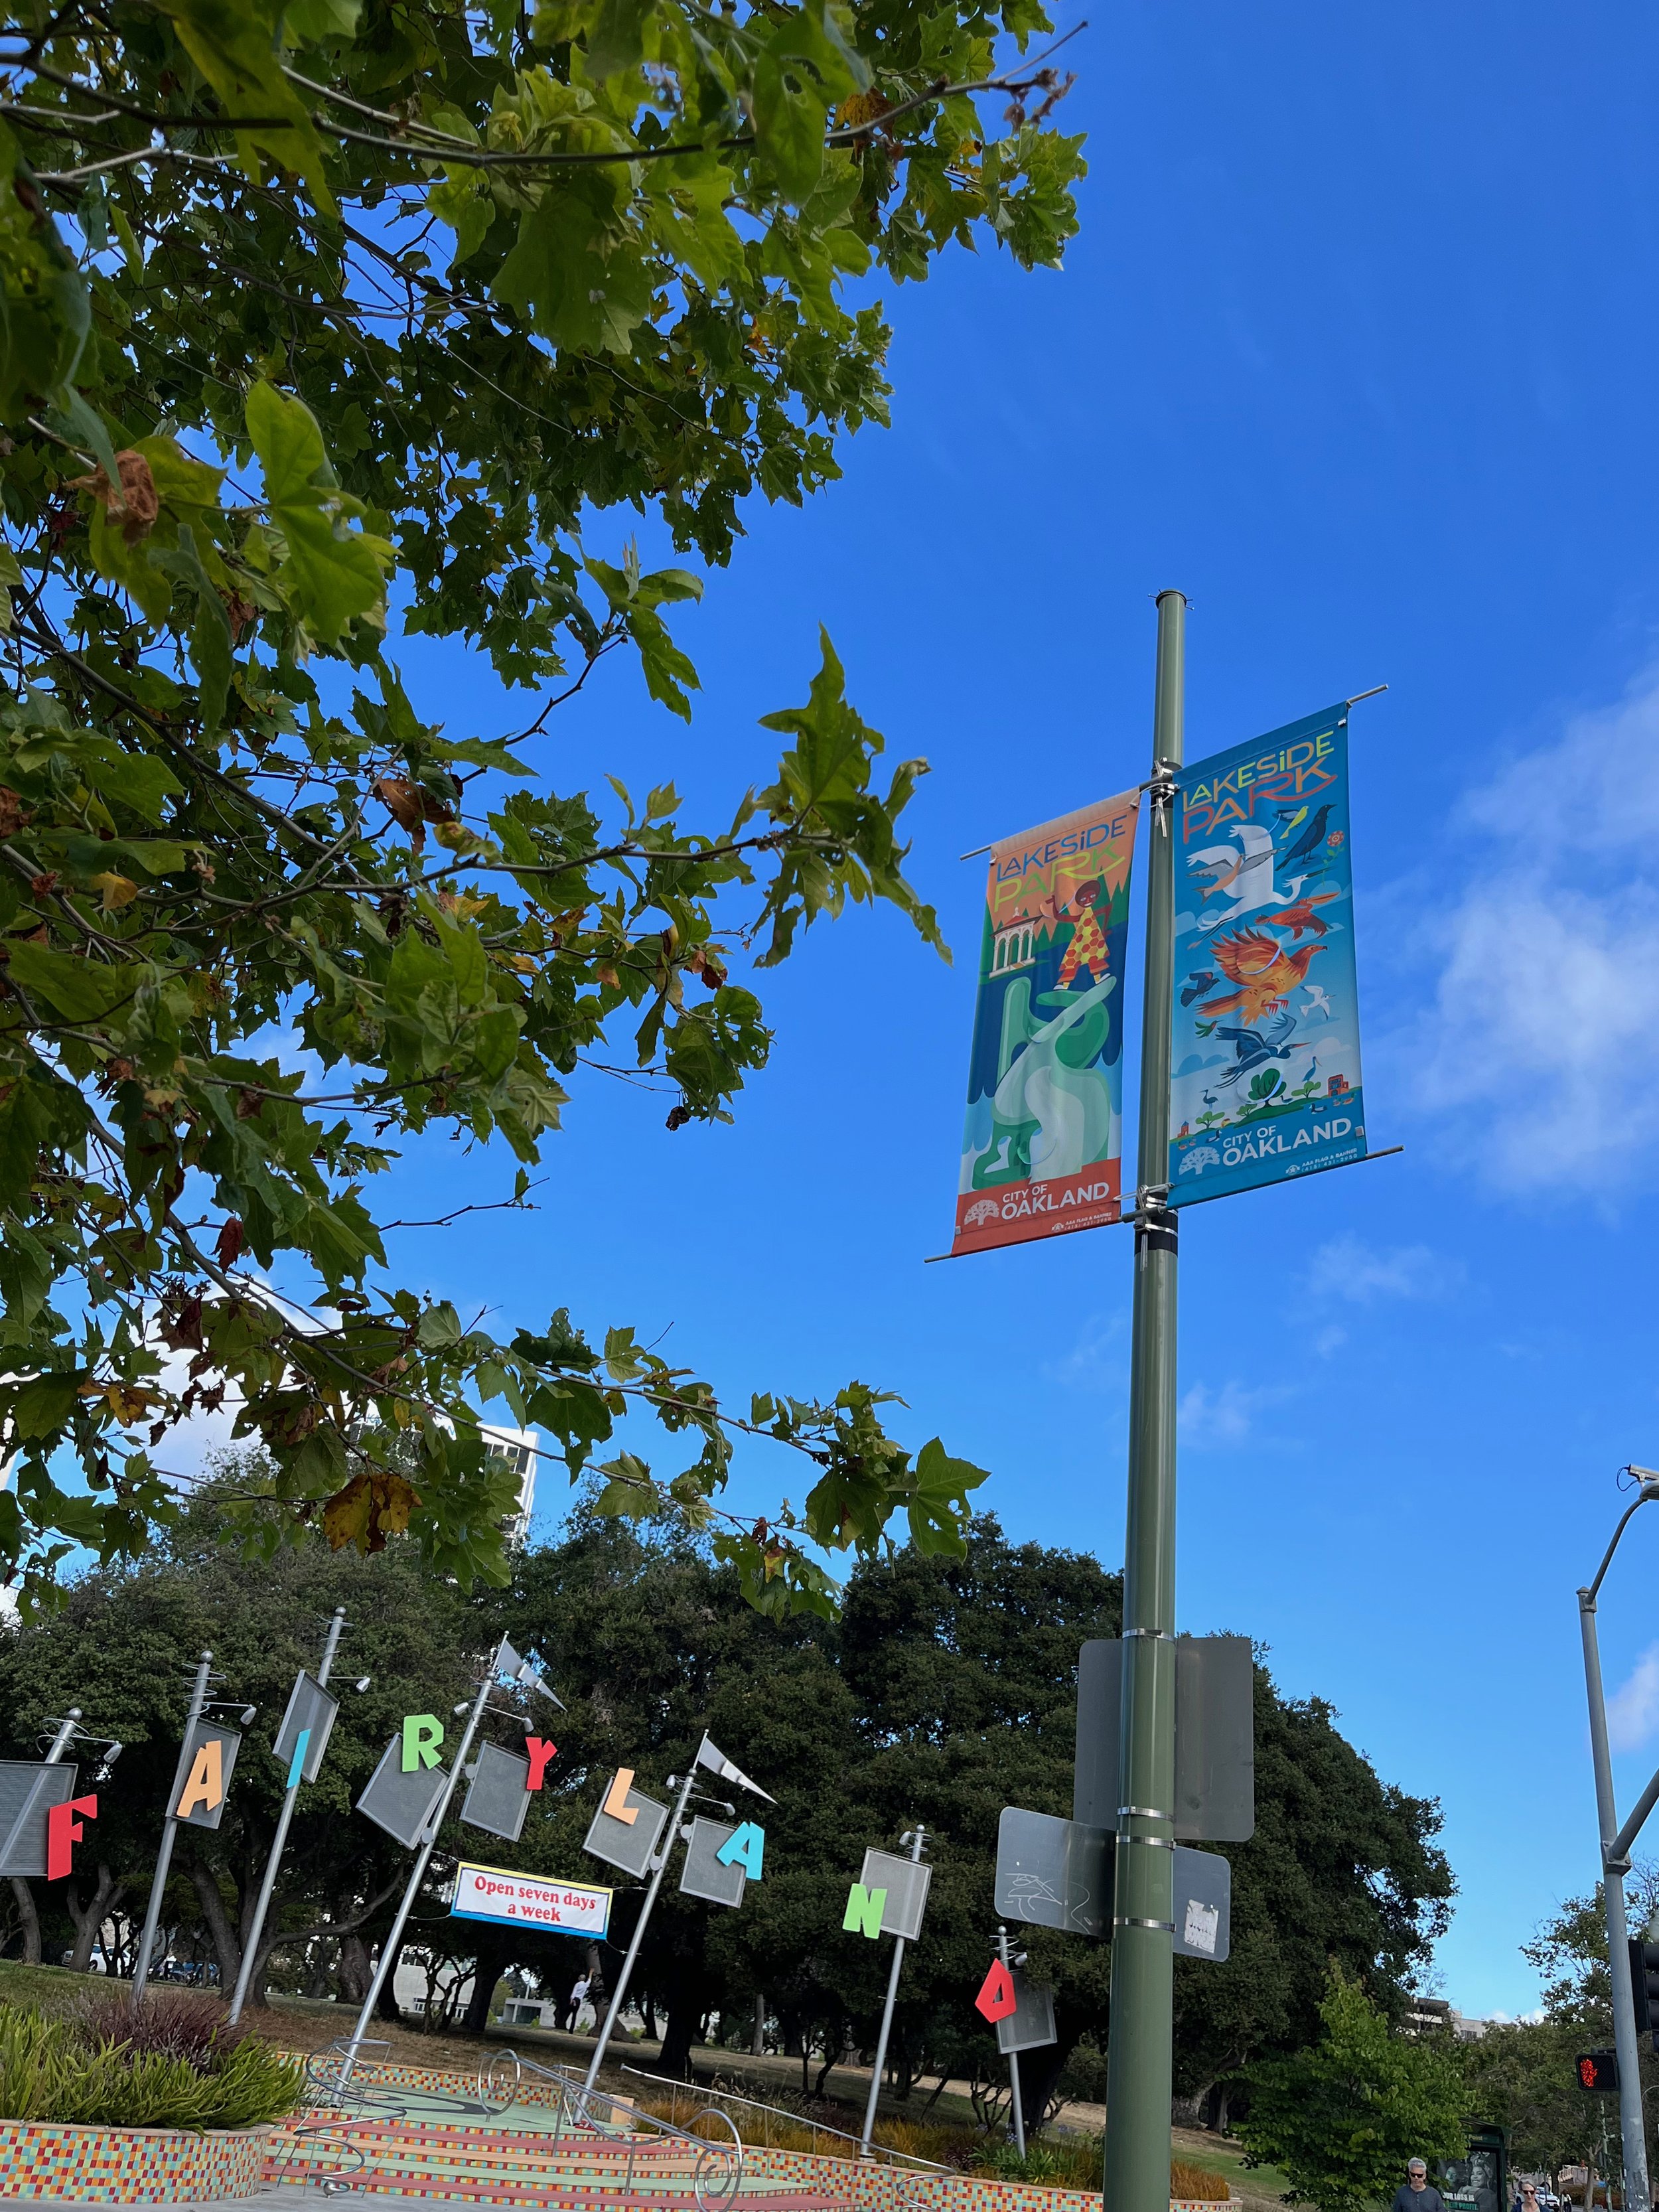 Lakeside Park Banners